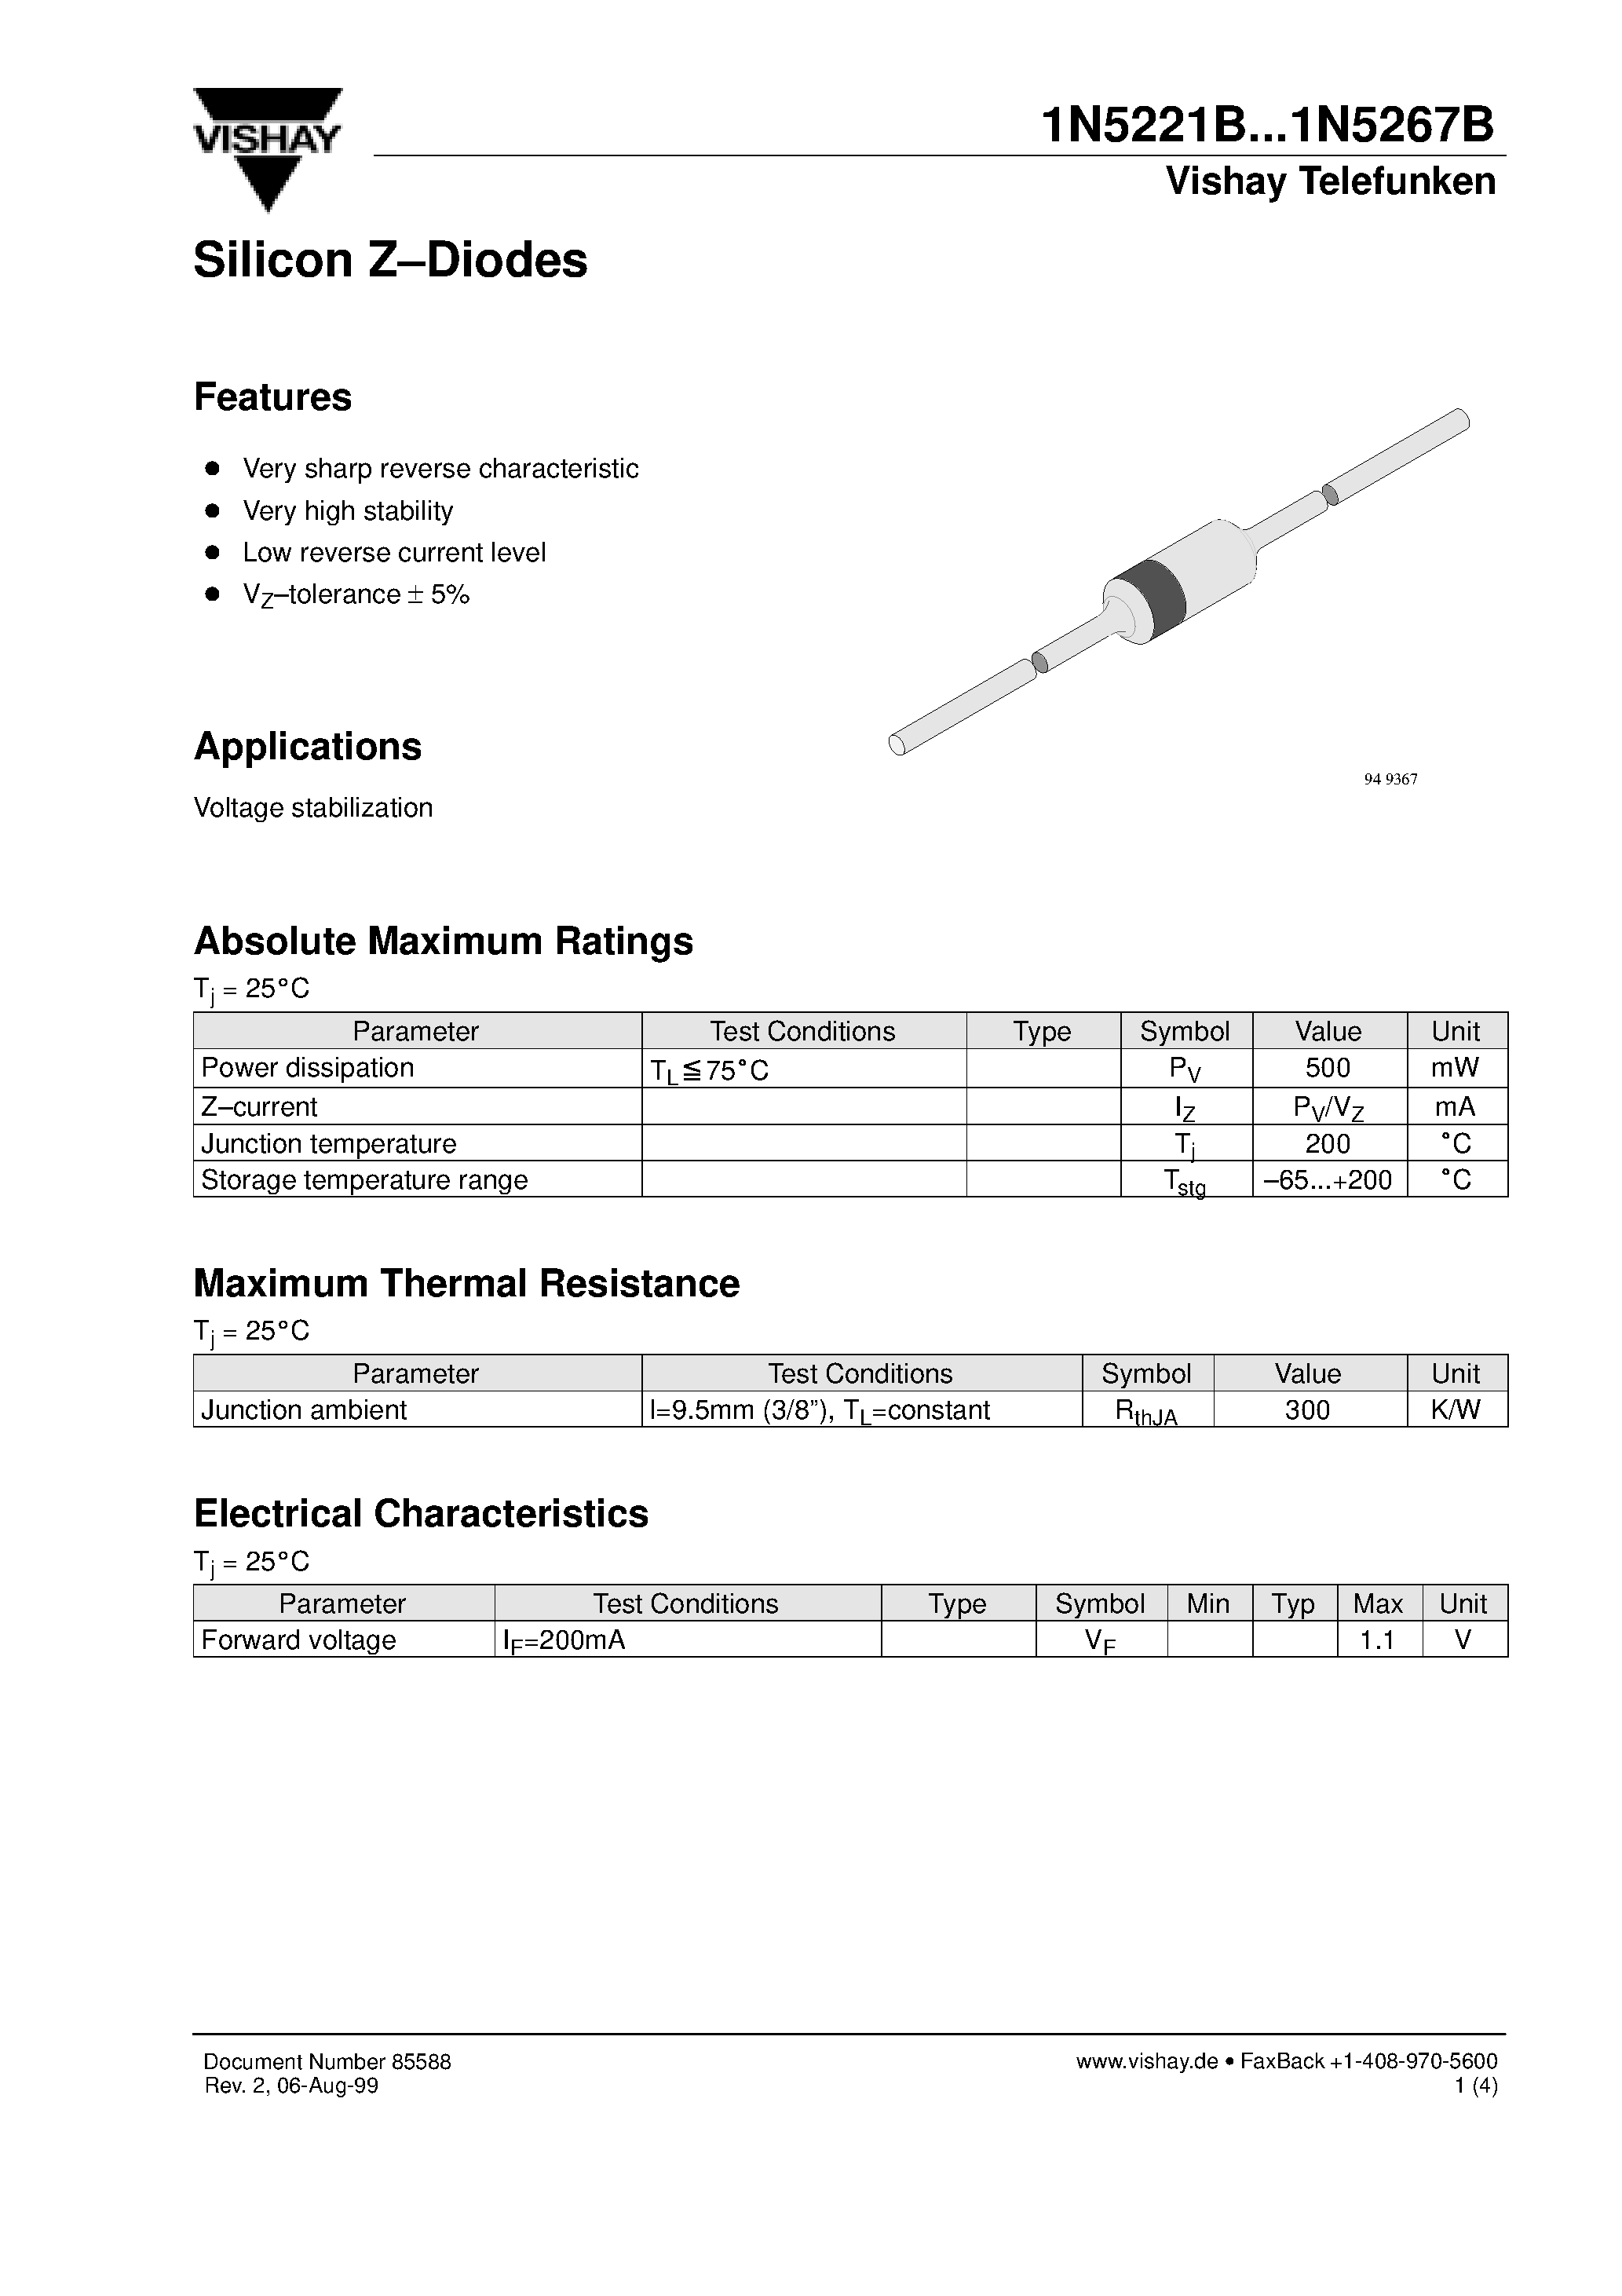 Datasheet 1N5237B - Silicon Z-Diodes page 1